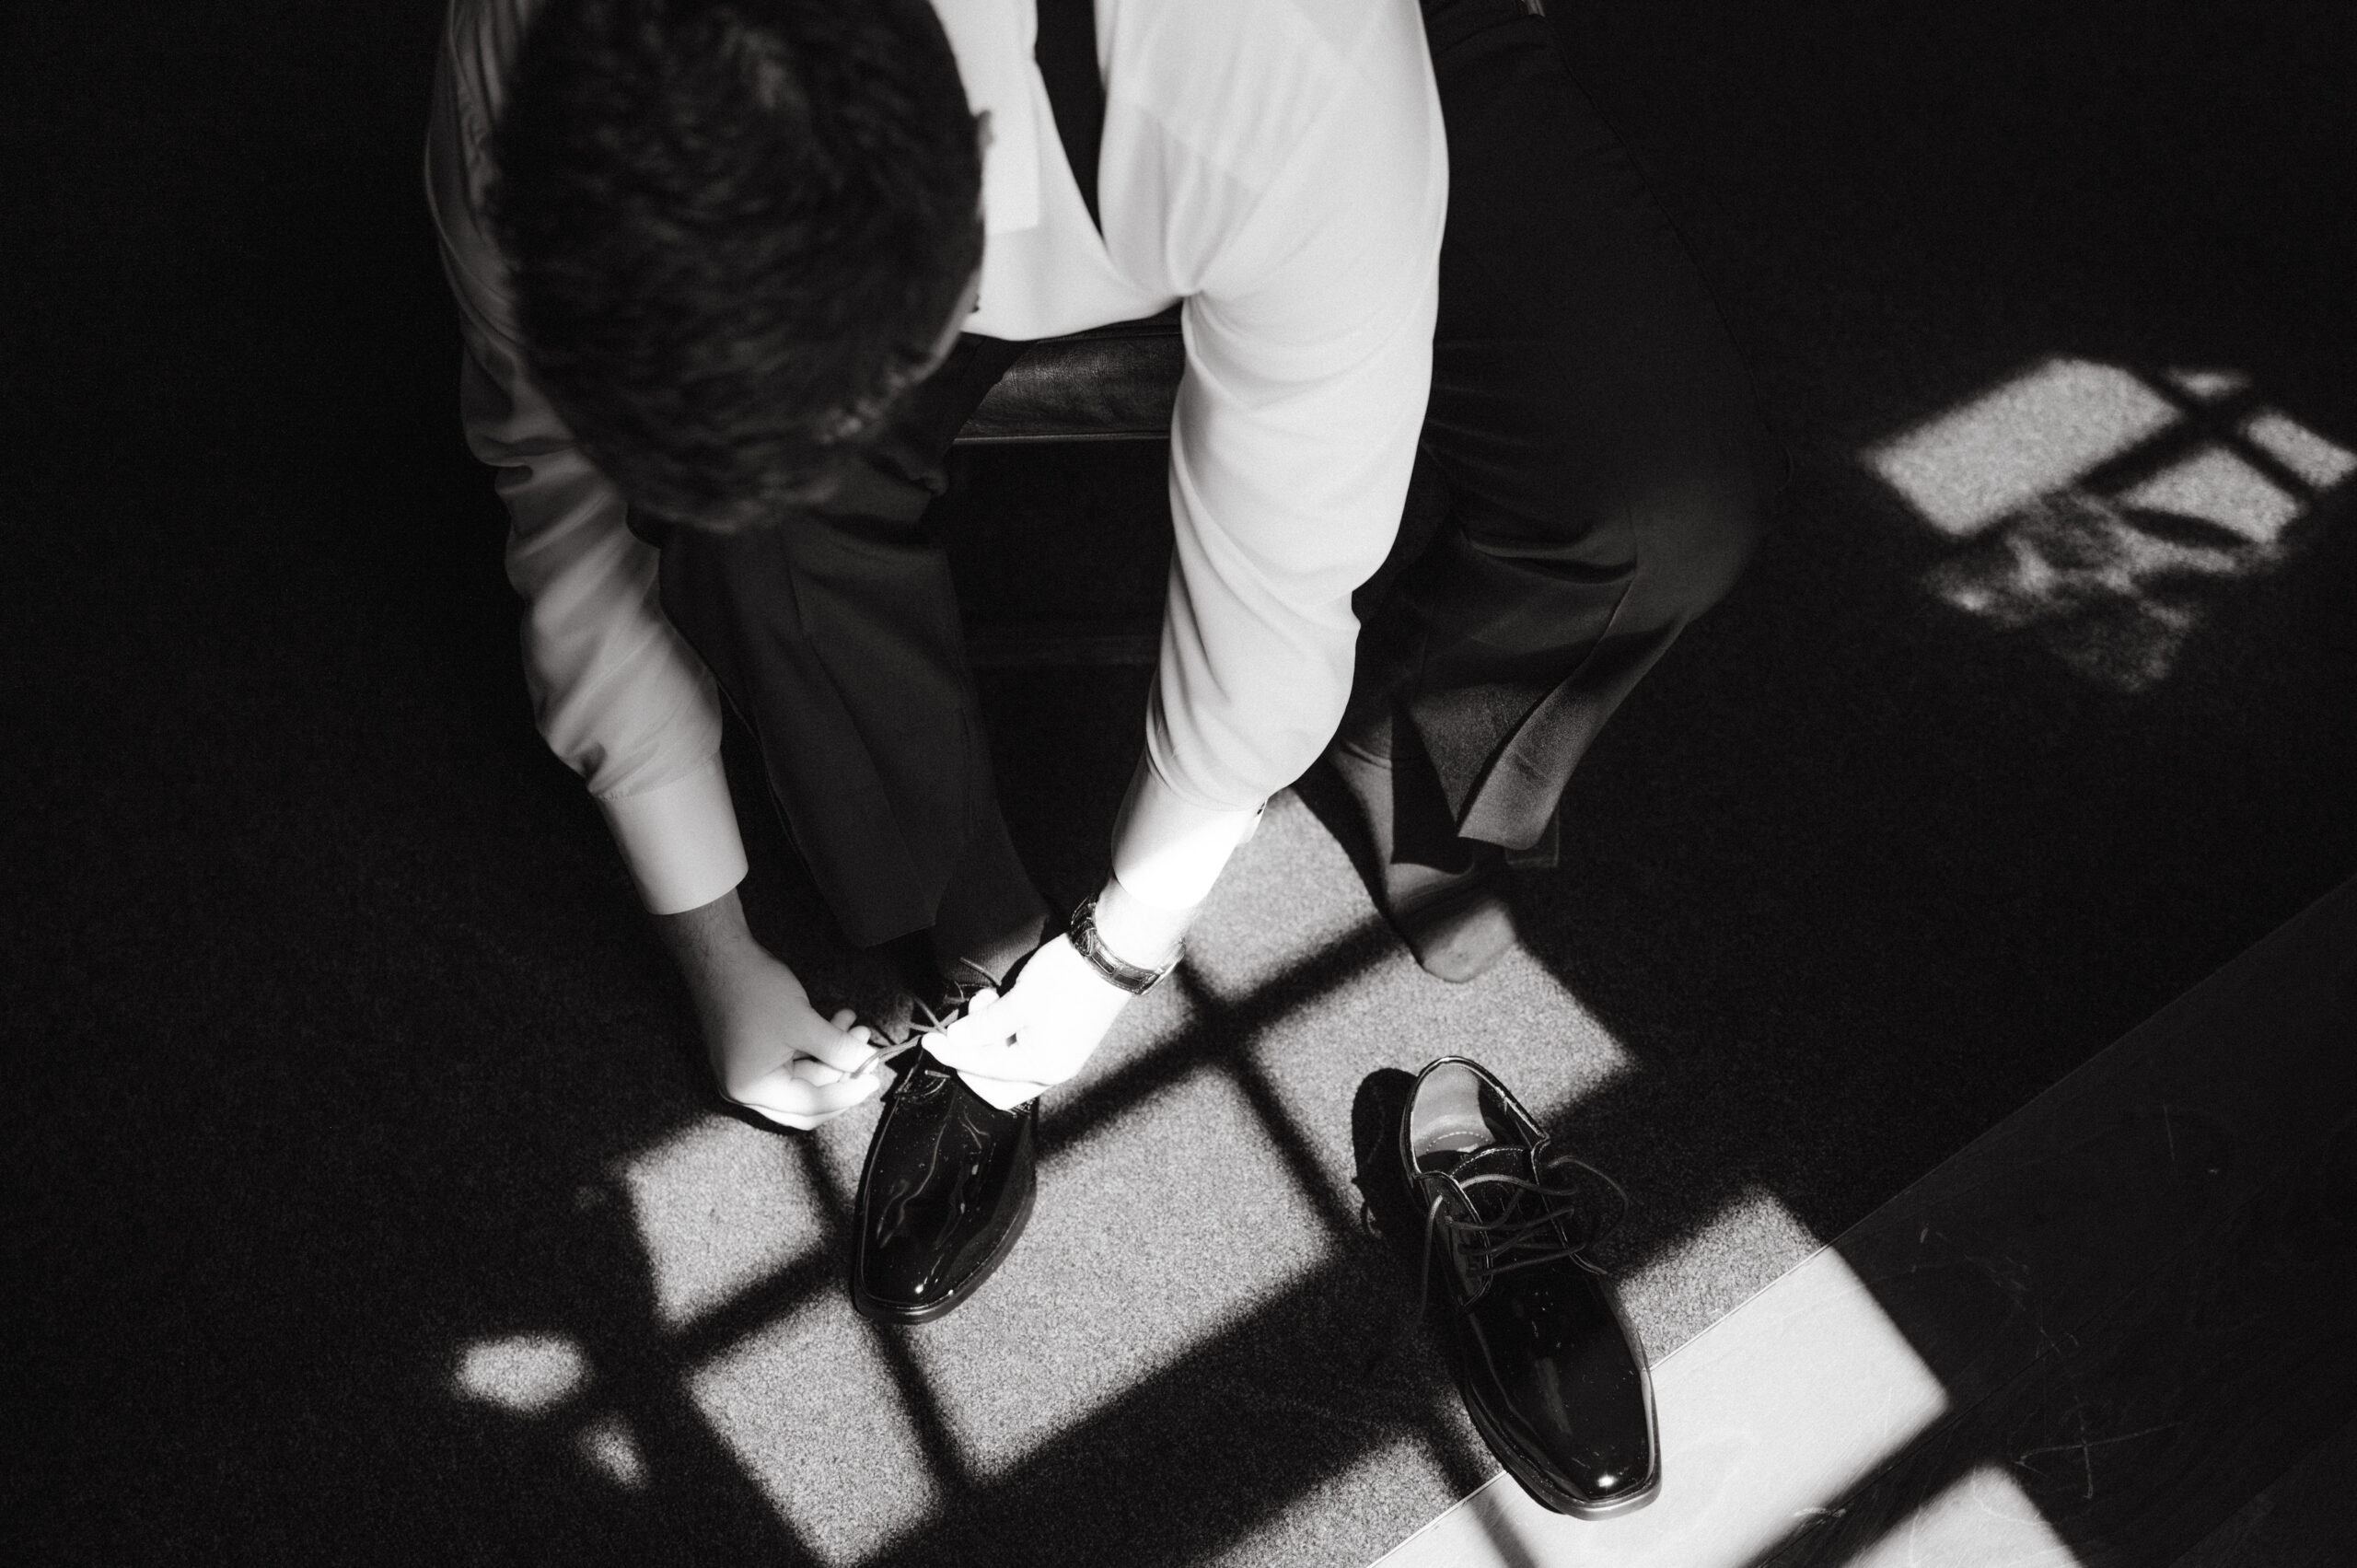 Editorial photo of the groom wearing his shoes. Timeless wedding photography Image by Jenny Fu Studio